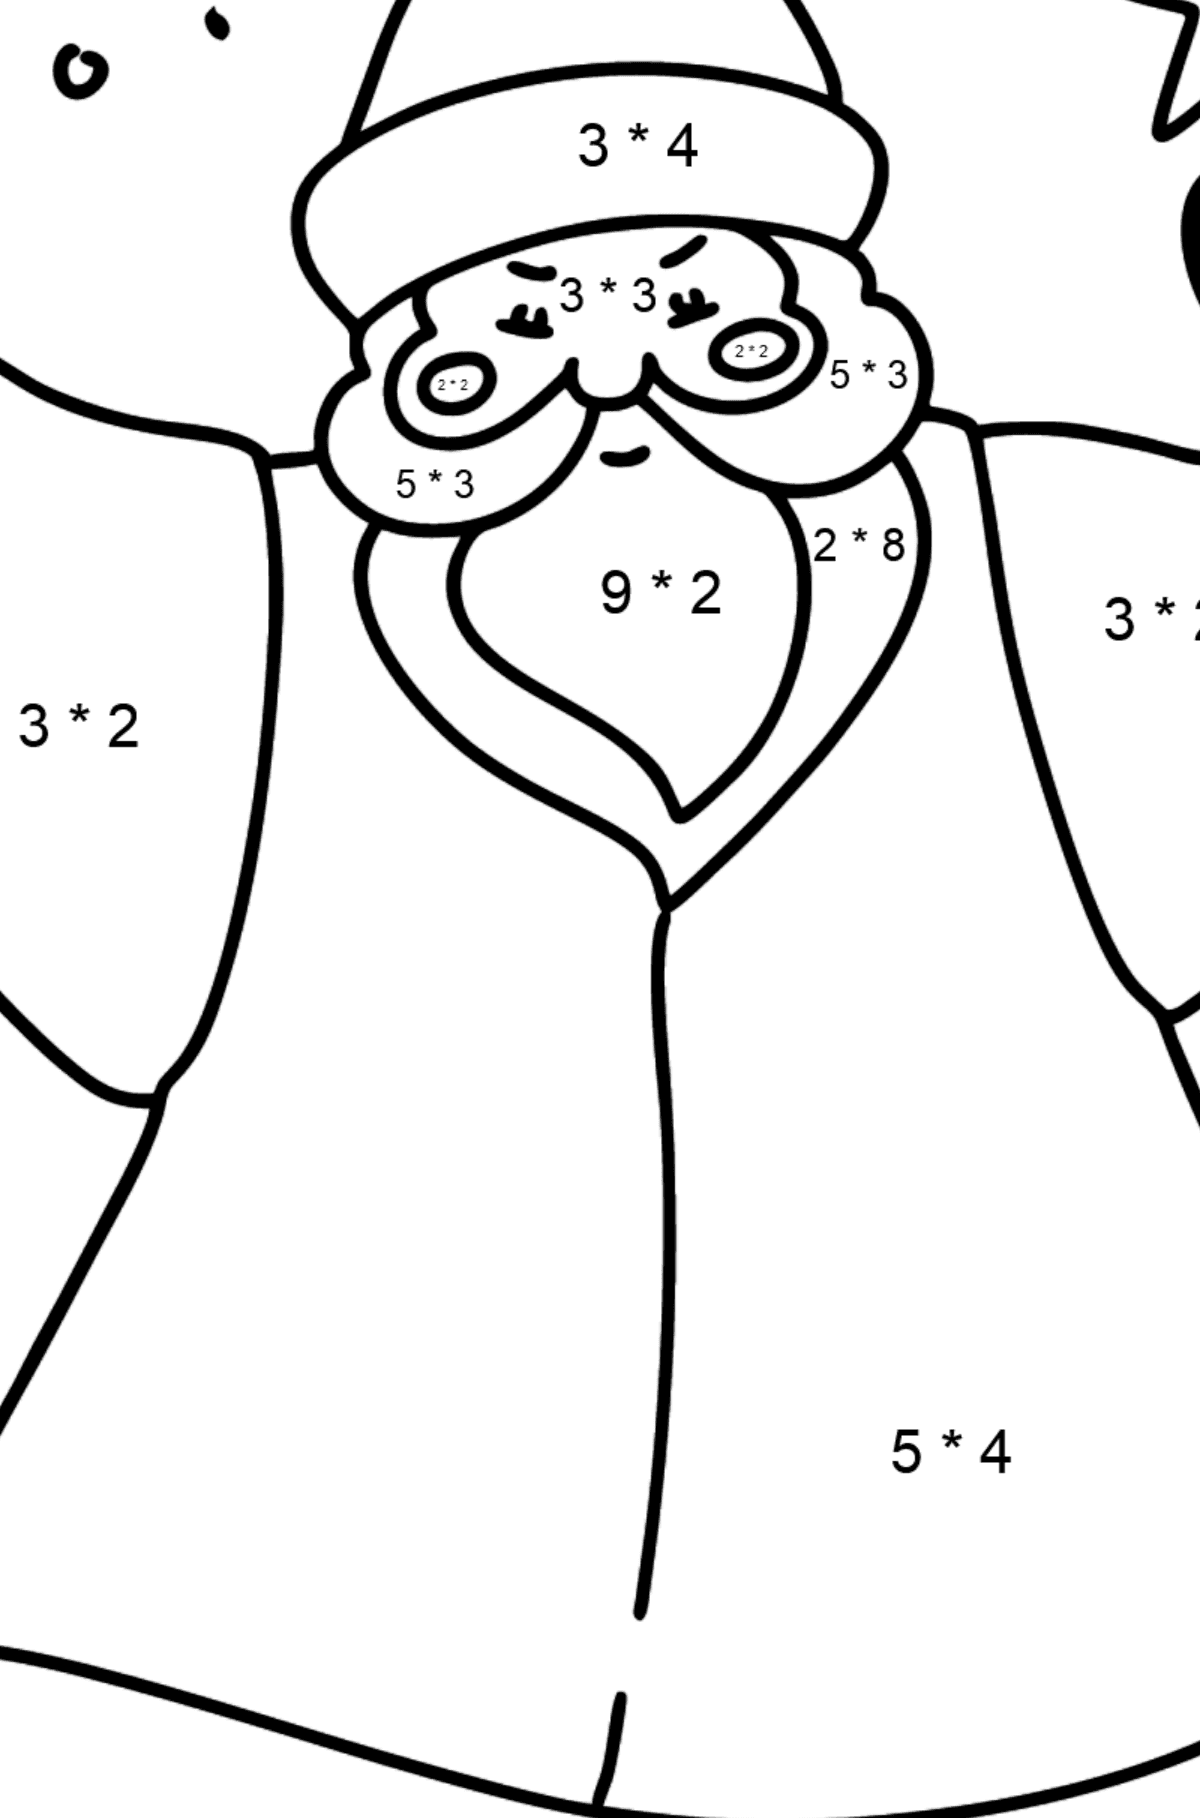 Father Frost coloring page - Math Coloring - Multiplication for Kids